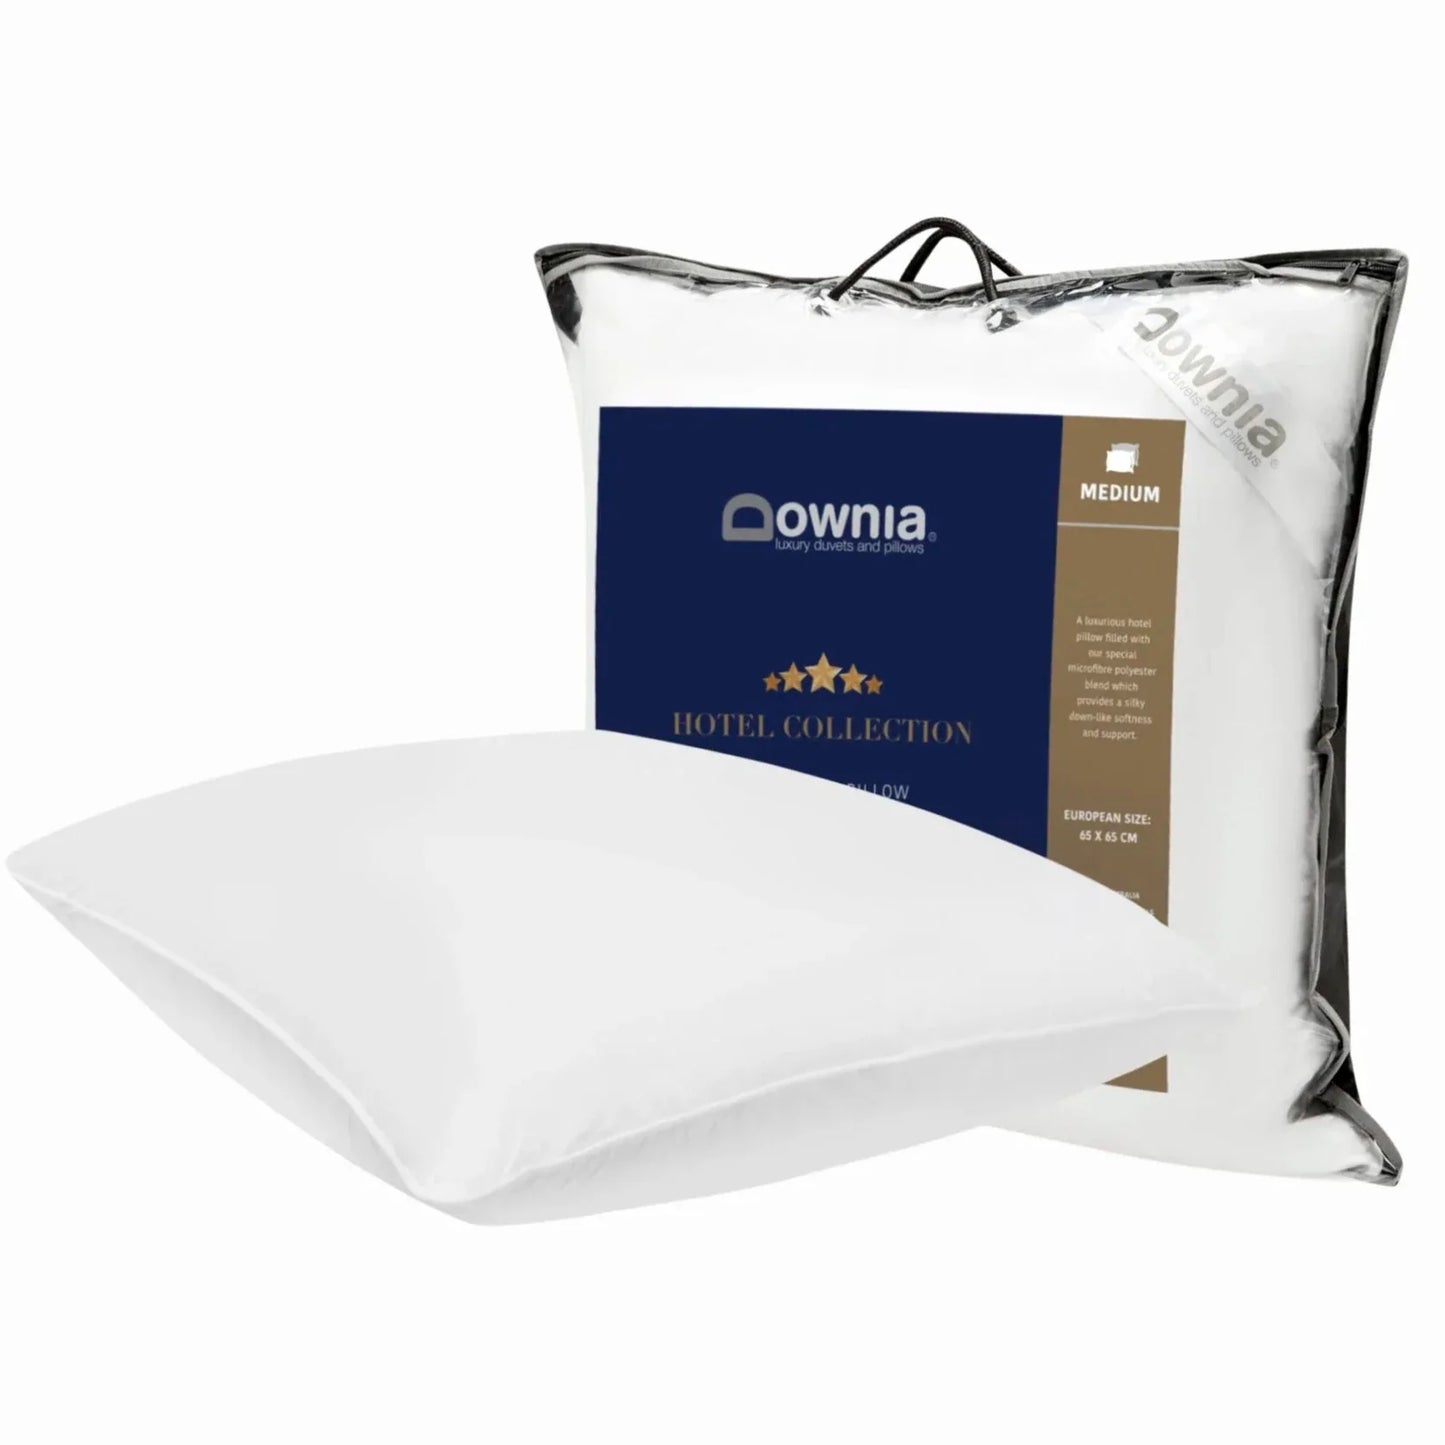 HOTEL COLLECTION Microfibre blend EUROPEAN PILLOW by Downia